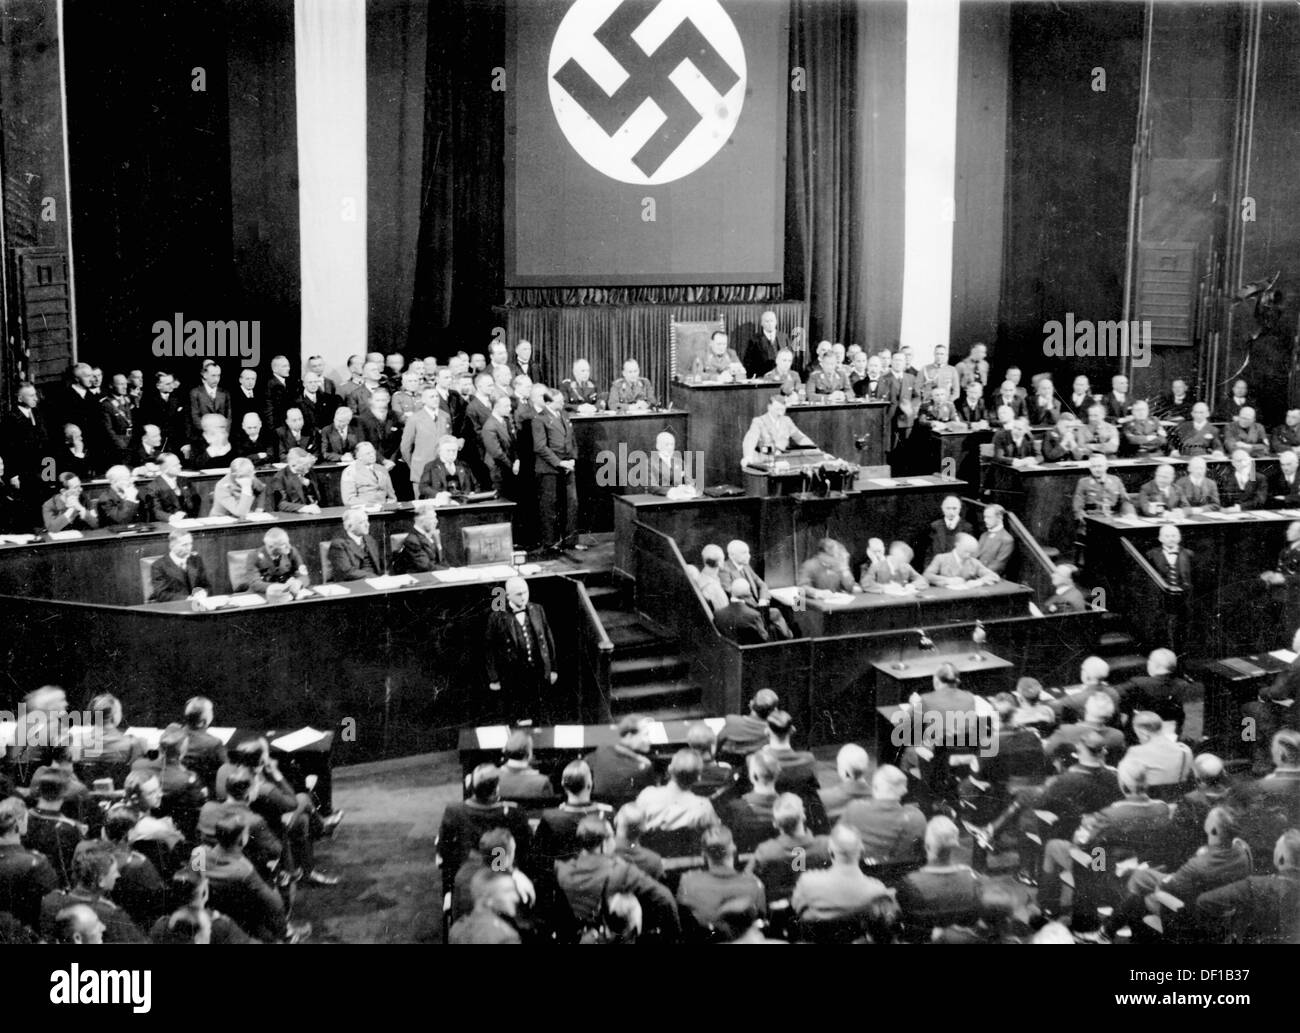 The image from the Nazi Propaganda! shows Reich Chancellor Adolf Hitler delivering a speech to the Reichstag in the Kroll Opera House in Berlin, Germany, 17 May 1933. To the left, first row (r-l): Vice Chancellor Franz von Papen, Foreign Minister Konstantin von Neurath, Reich Minister of the Interior Wilhelm Frick; second row (r-l): Minister of Economics and Agriculture Alfred Hugenberg, Minister for Labour Franz Seldte, Minister of War Werner von Blomberg. Behind Hitler, Hermann Göring. Fotoarchiv für Zeitgeschichte Stock Photo